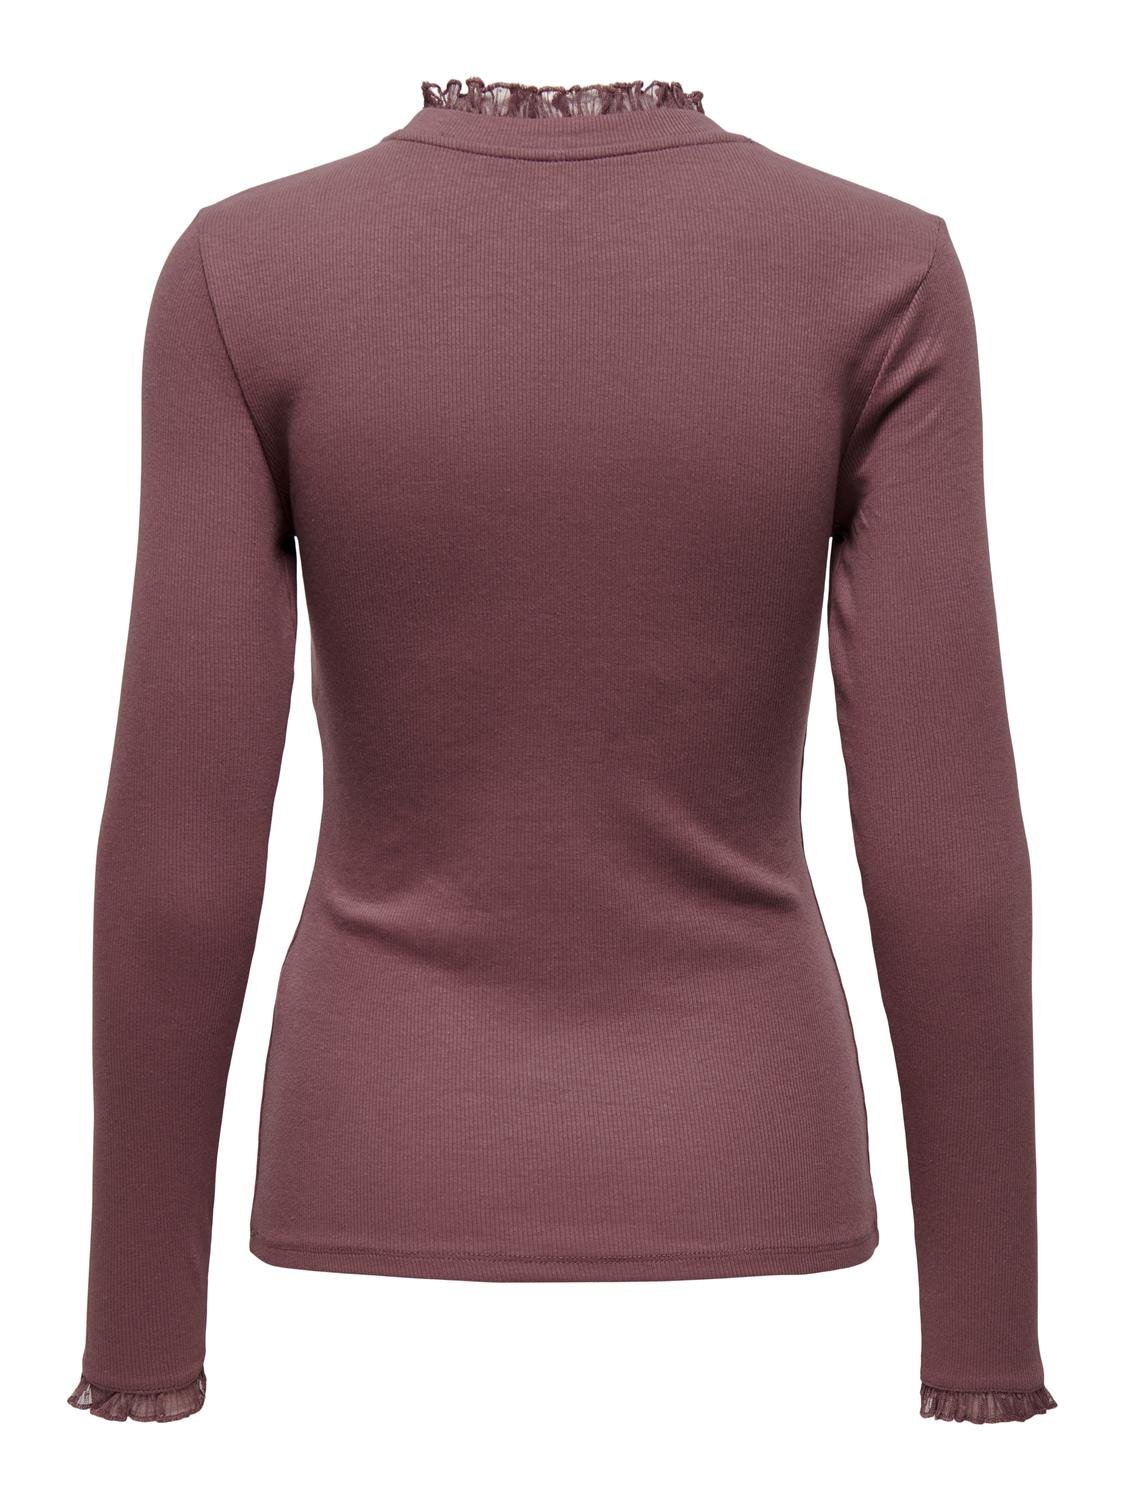 ONLY Regular Fit Round Neck Top -Rose Brown - 15277888